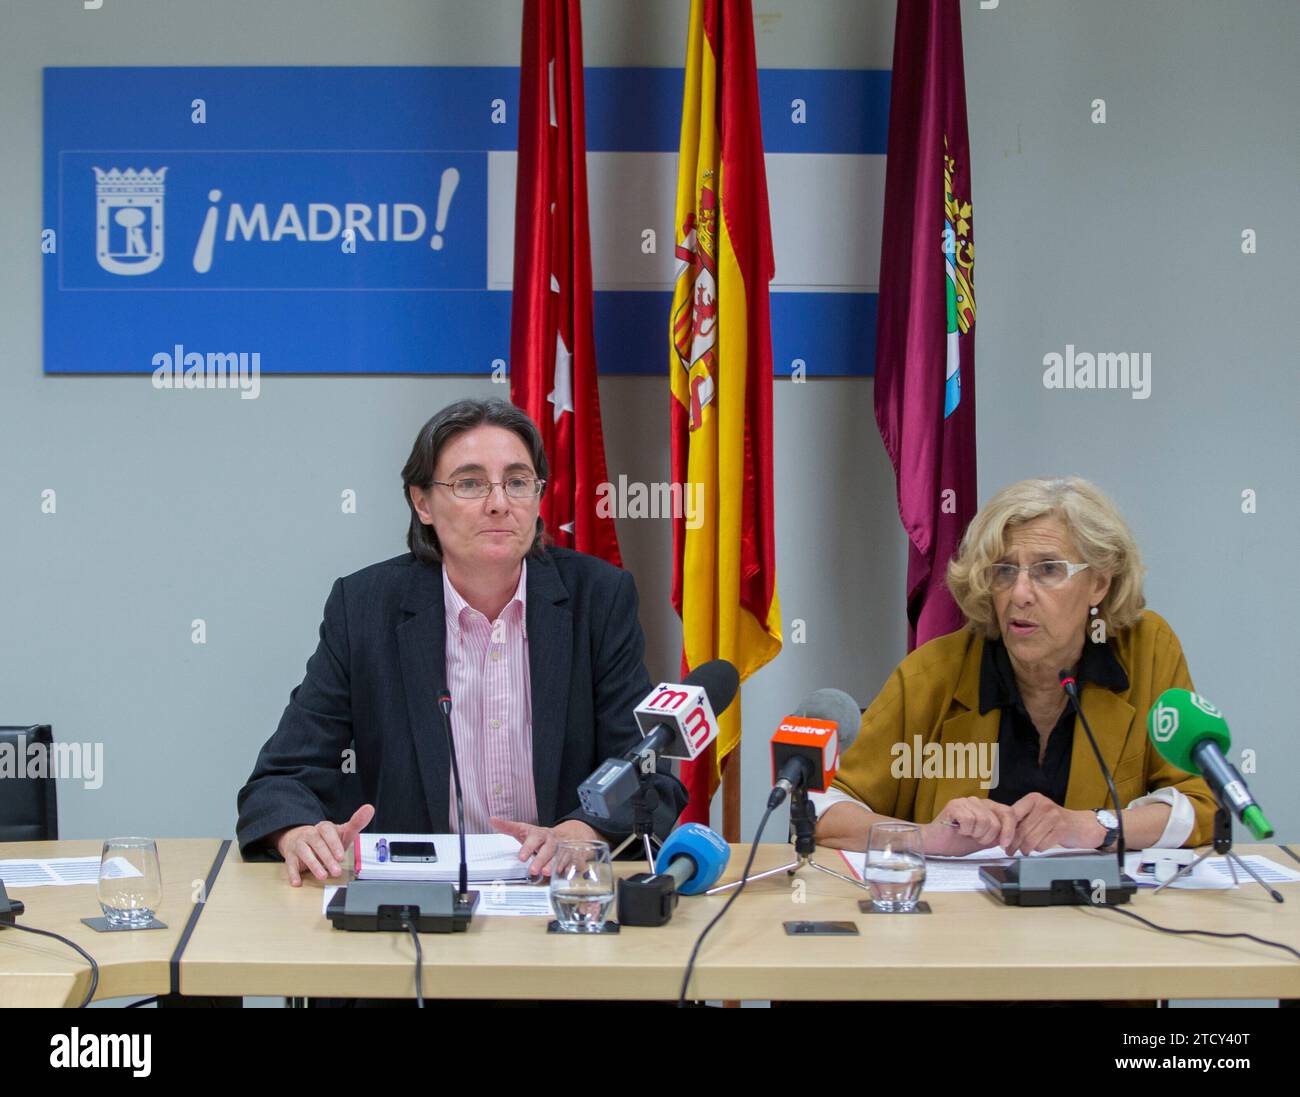 Madrid, 06/17/2015. Manuela Carmena and Marta Higueras, responsible for the social rights area, meet with the technicians of the districts of Madrid. Photo: Ignacio Gil ARCHDC. Credit: Album / Archivo ABC / Ignacio Gil Stock Photo